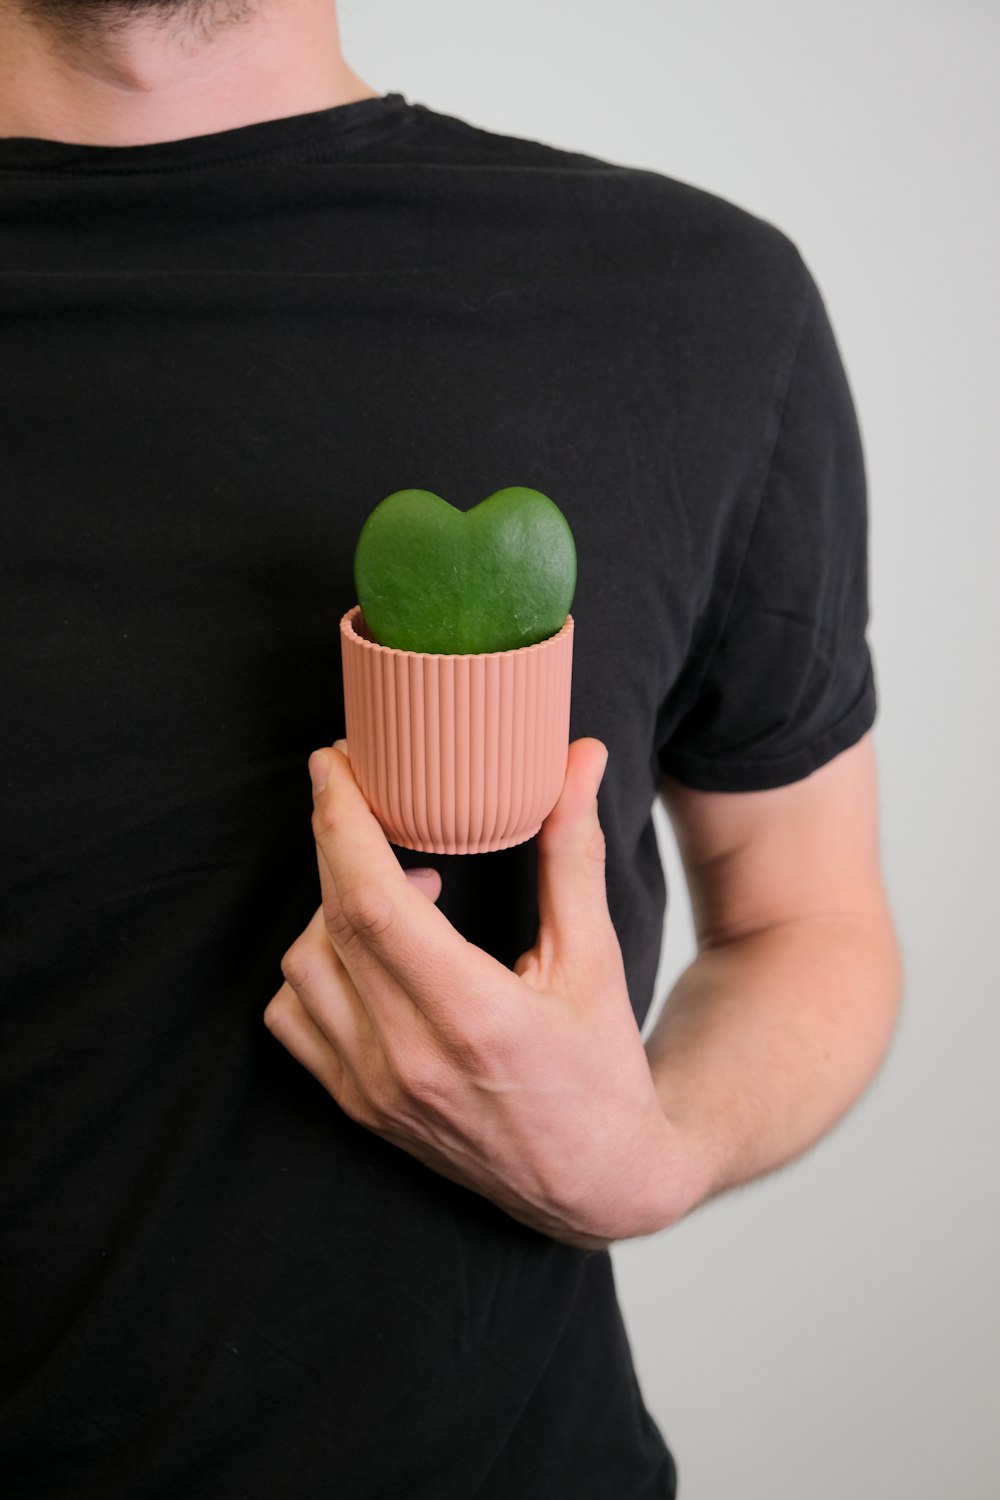 a man holding a pink cup with a green heart in it